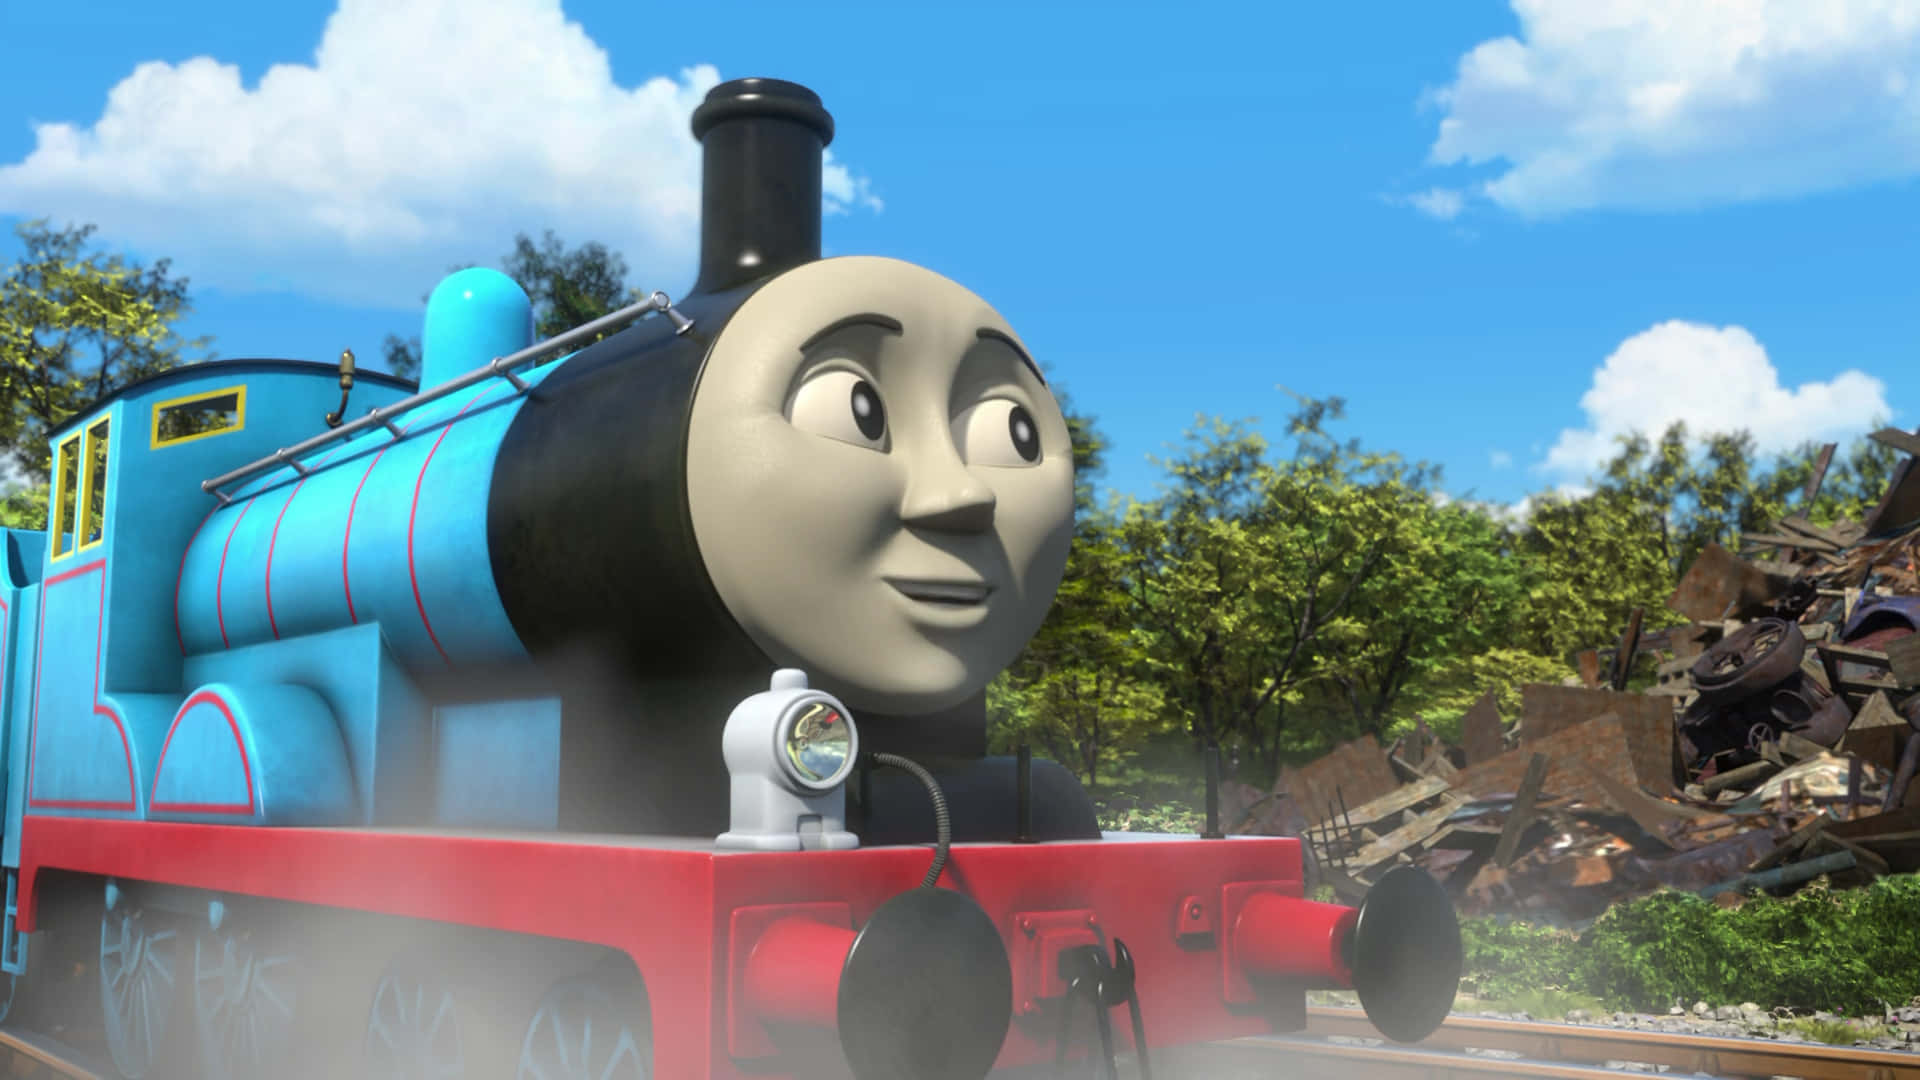 Thomas And Friends Under The Blue Sky Wallpaper